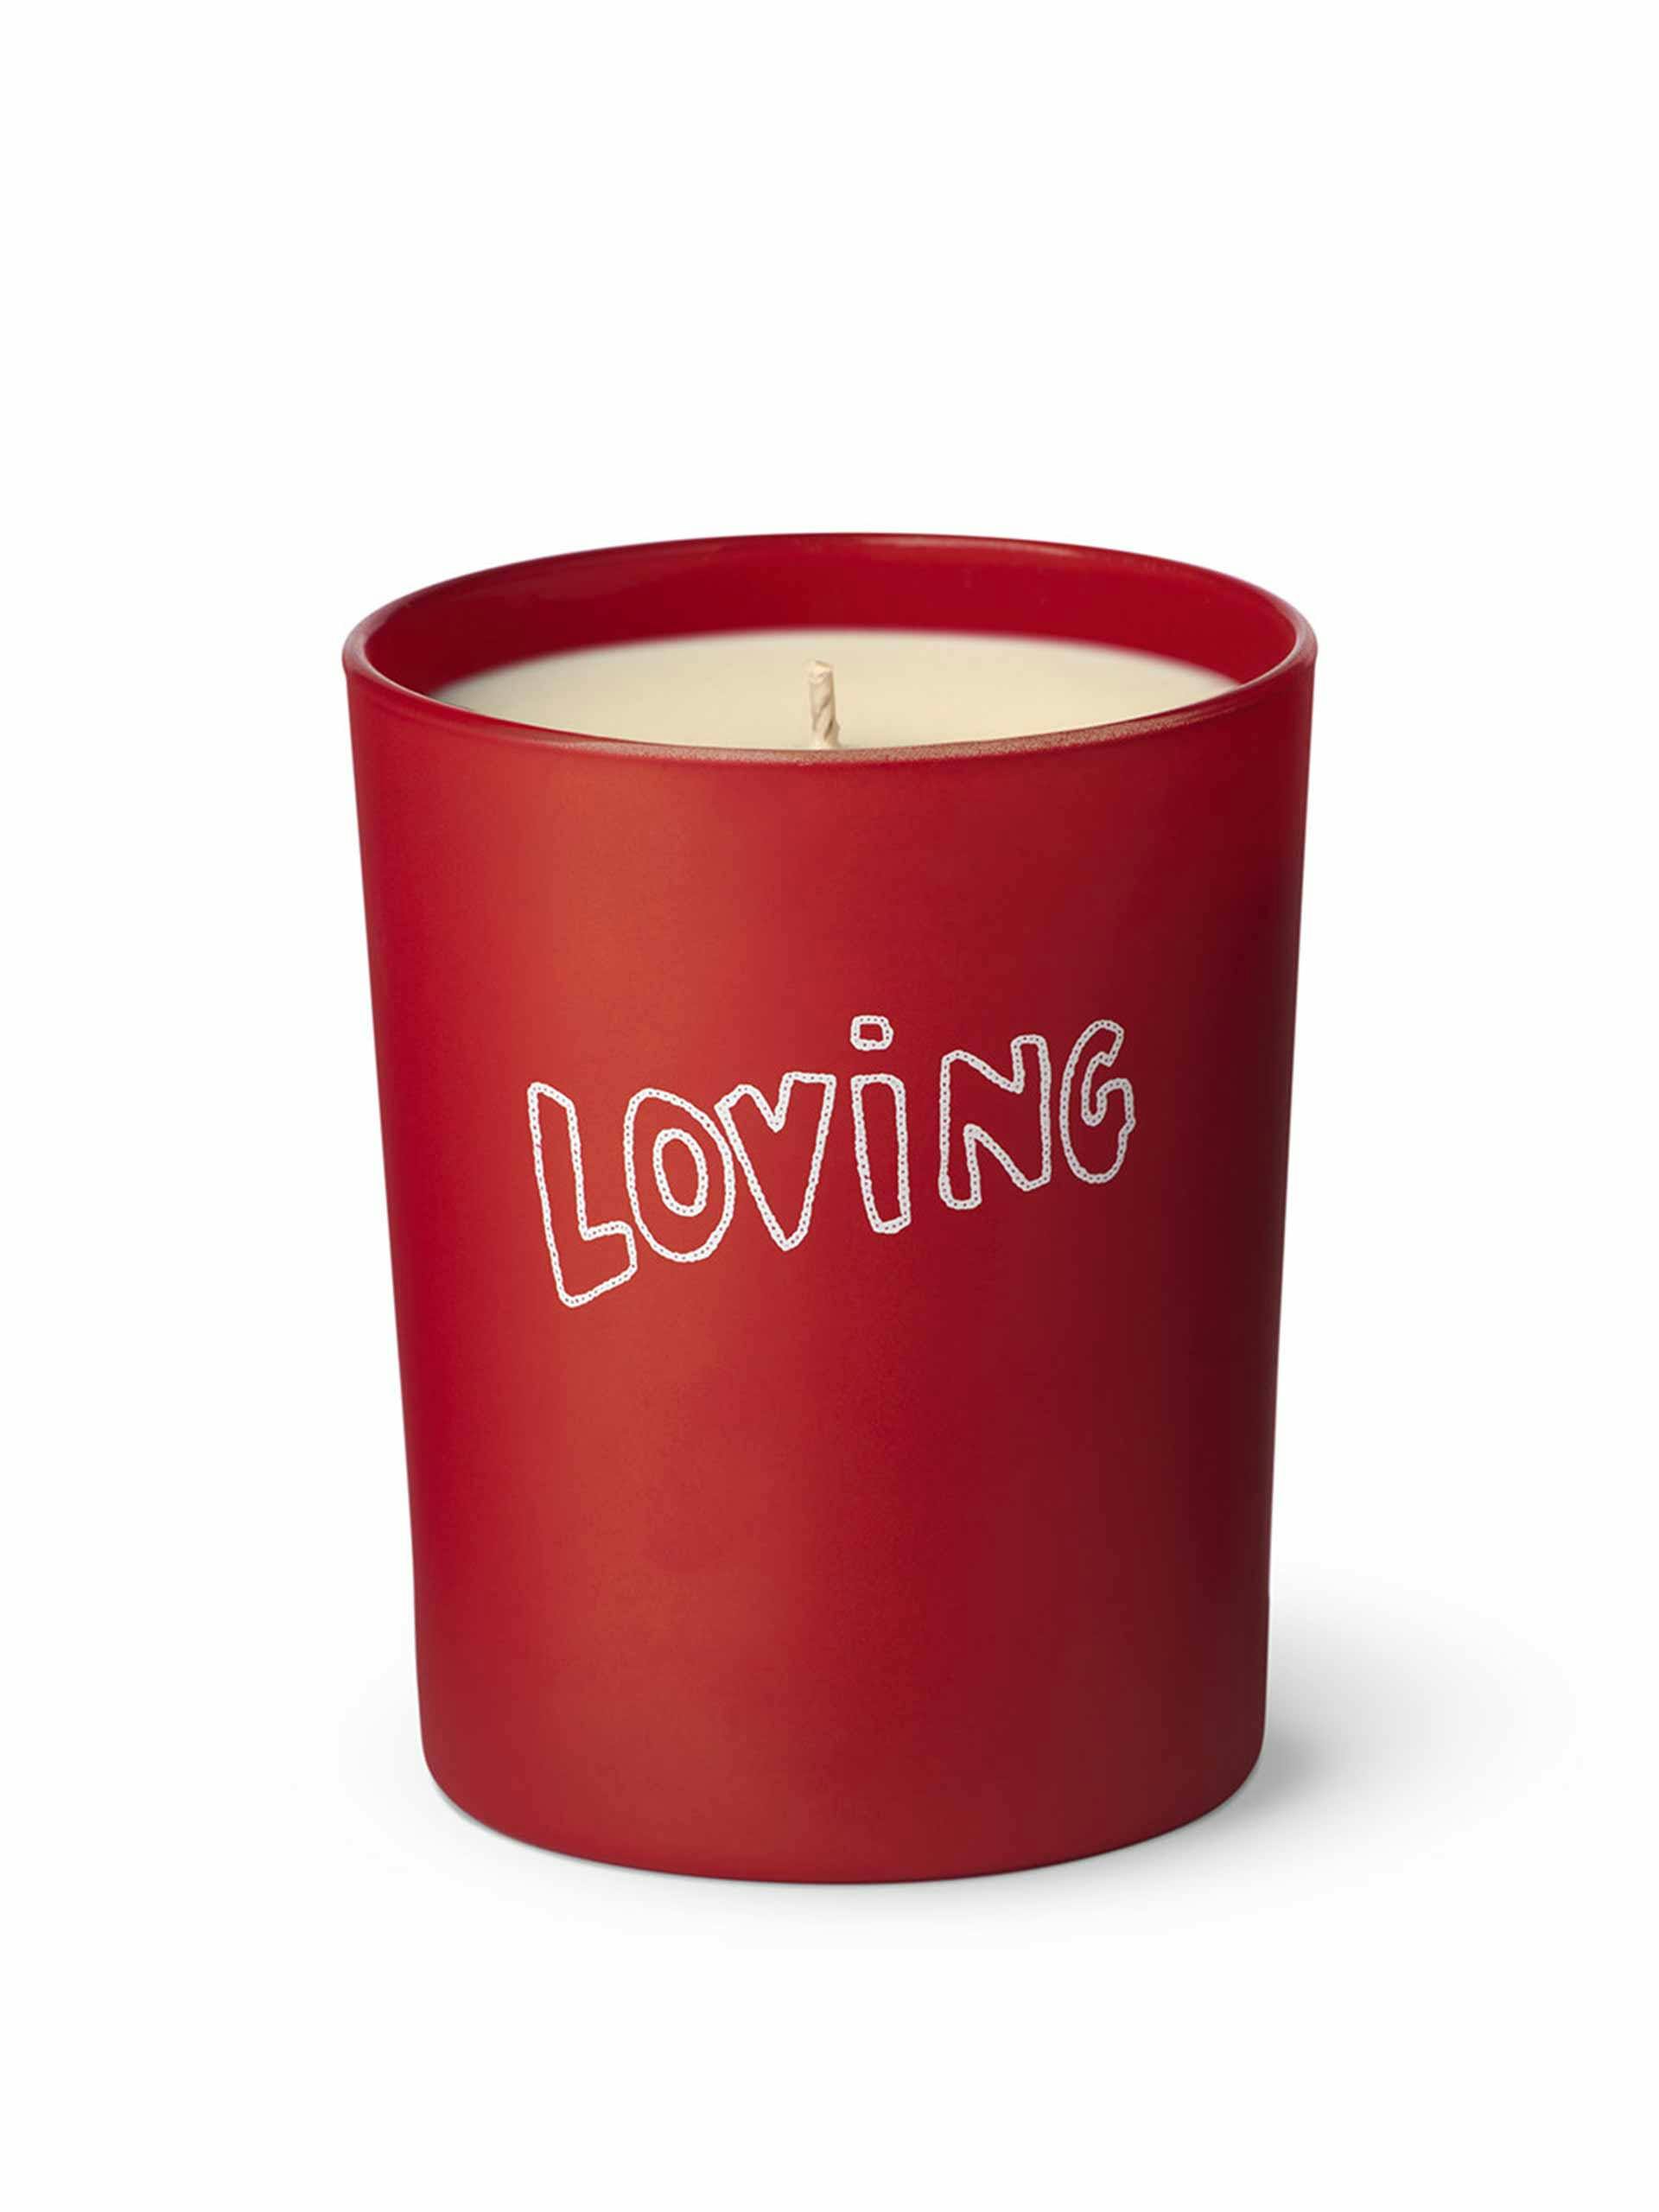 Loving scented candle